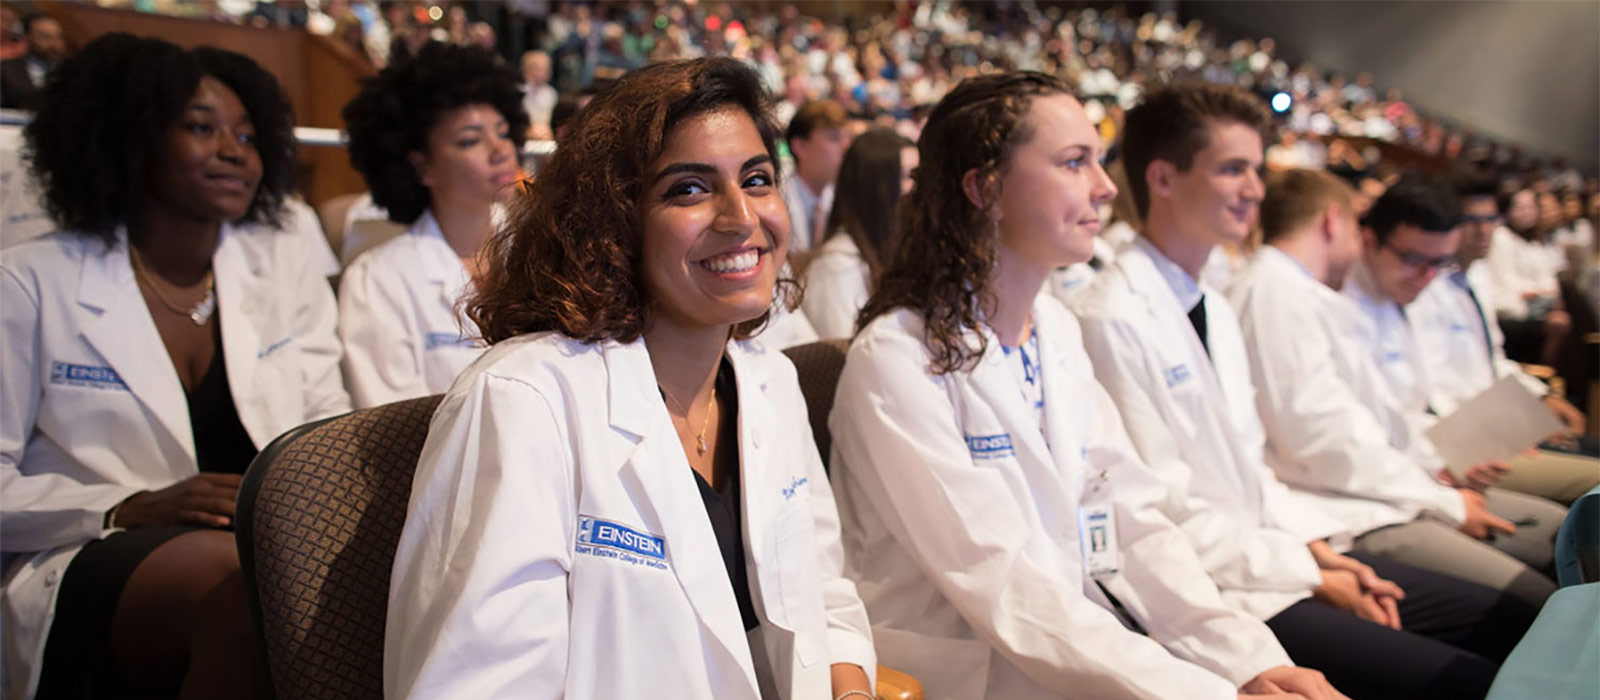 On Becoming a Physician: New Einstein Students Receive White Coats and Stethoscopes